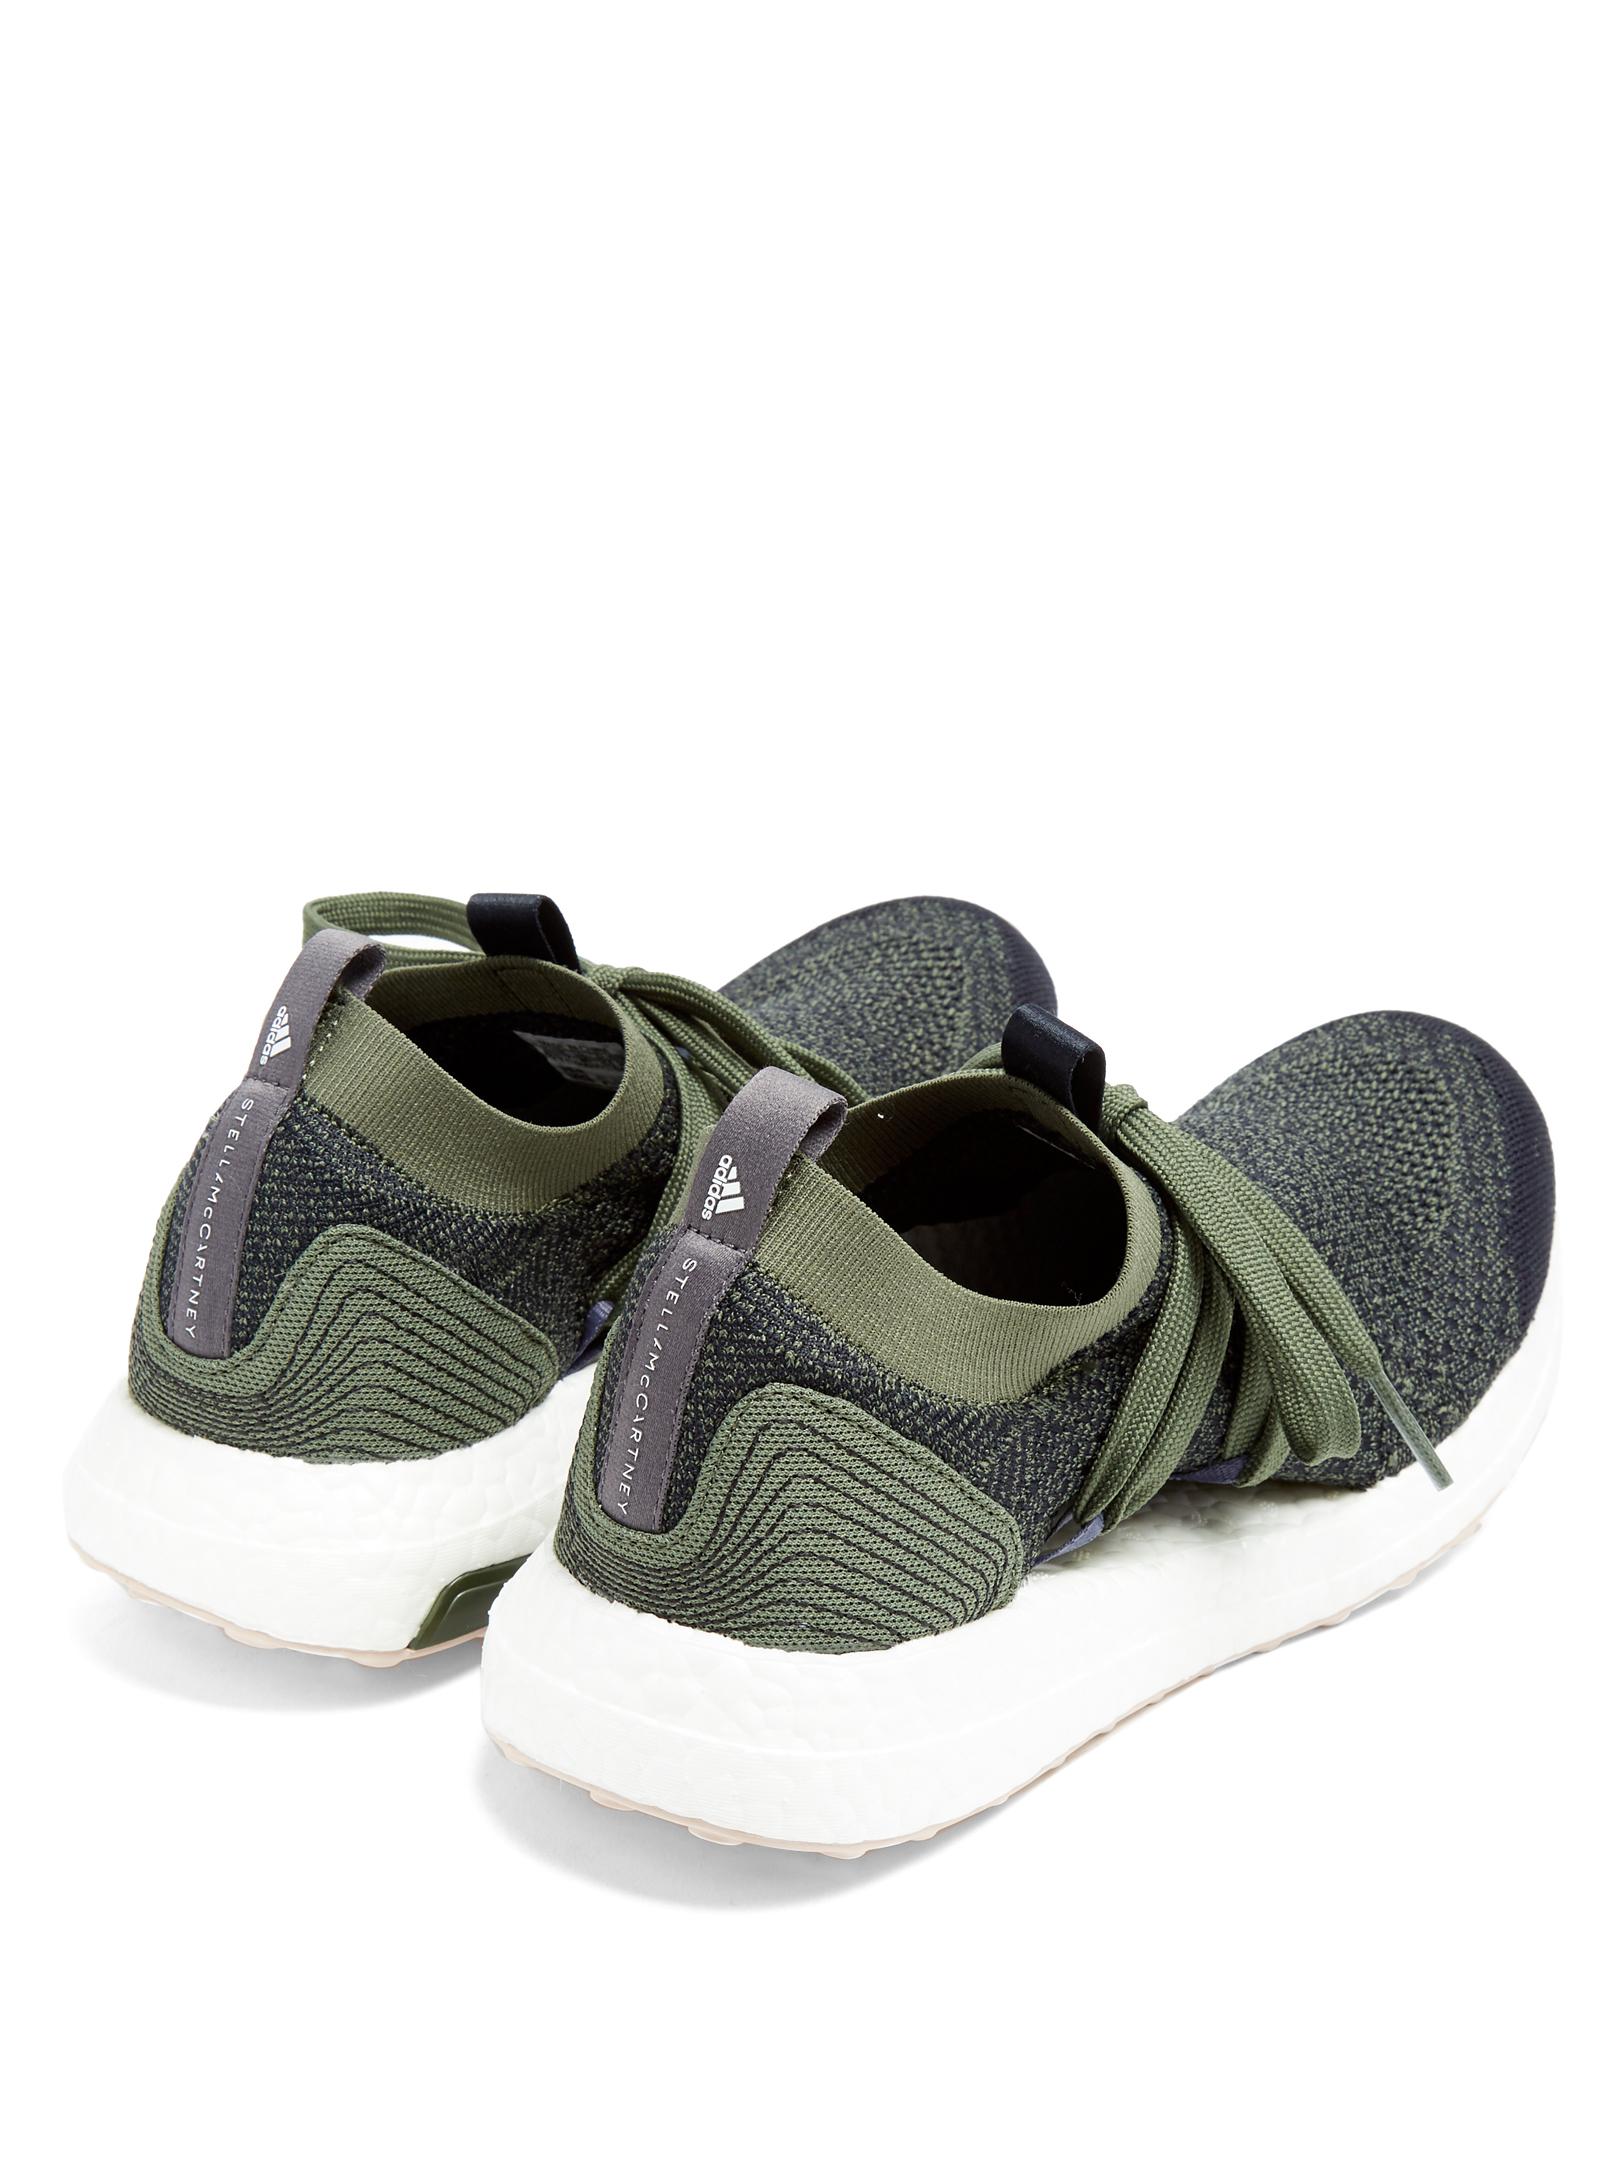 adidas By Stella McCartney Ultra Boost X Parley Knitted Trainers in Green |  Lyst